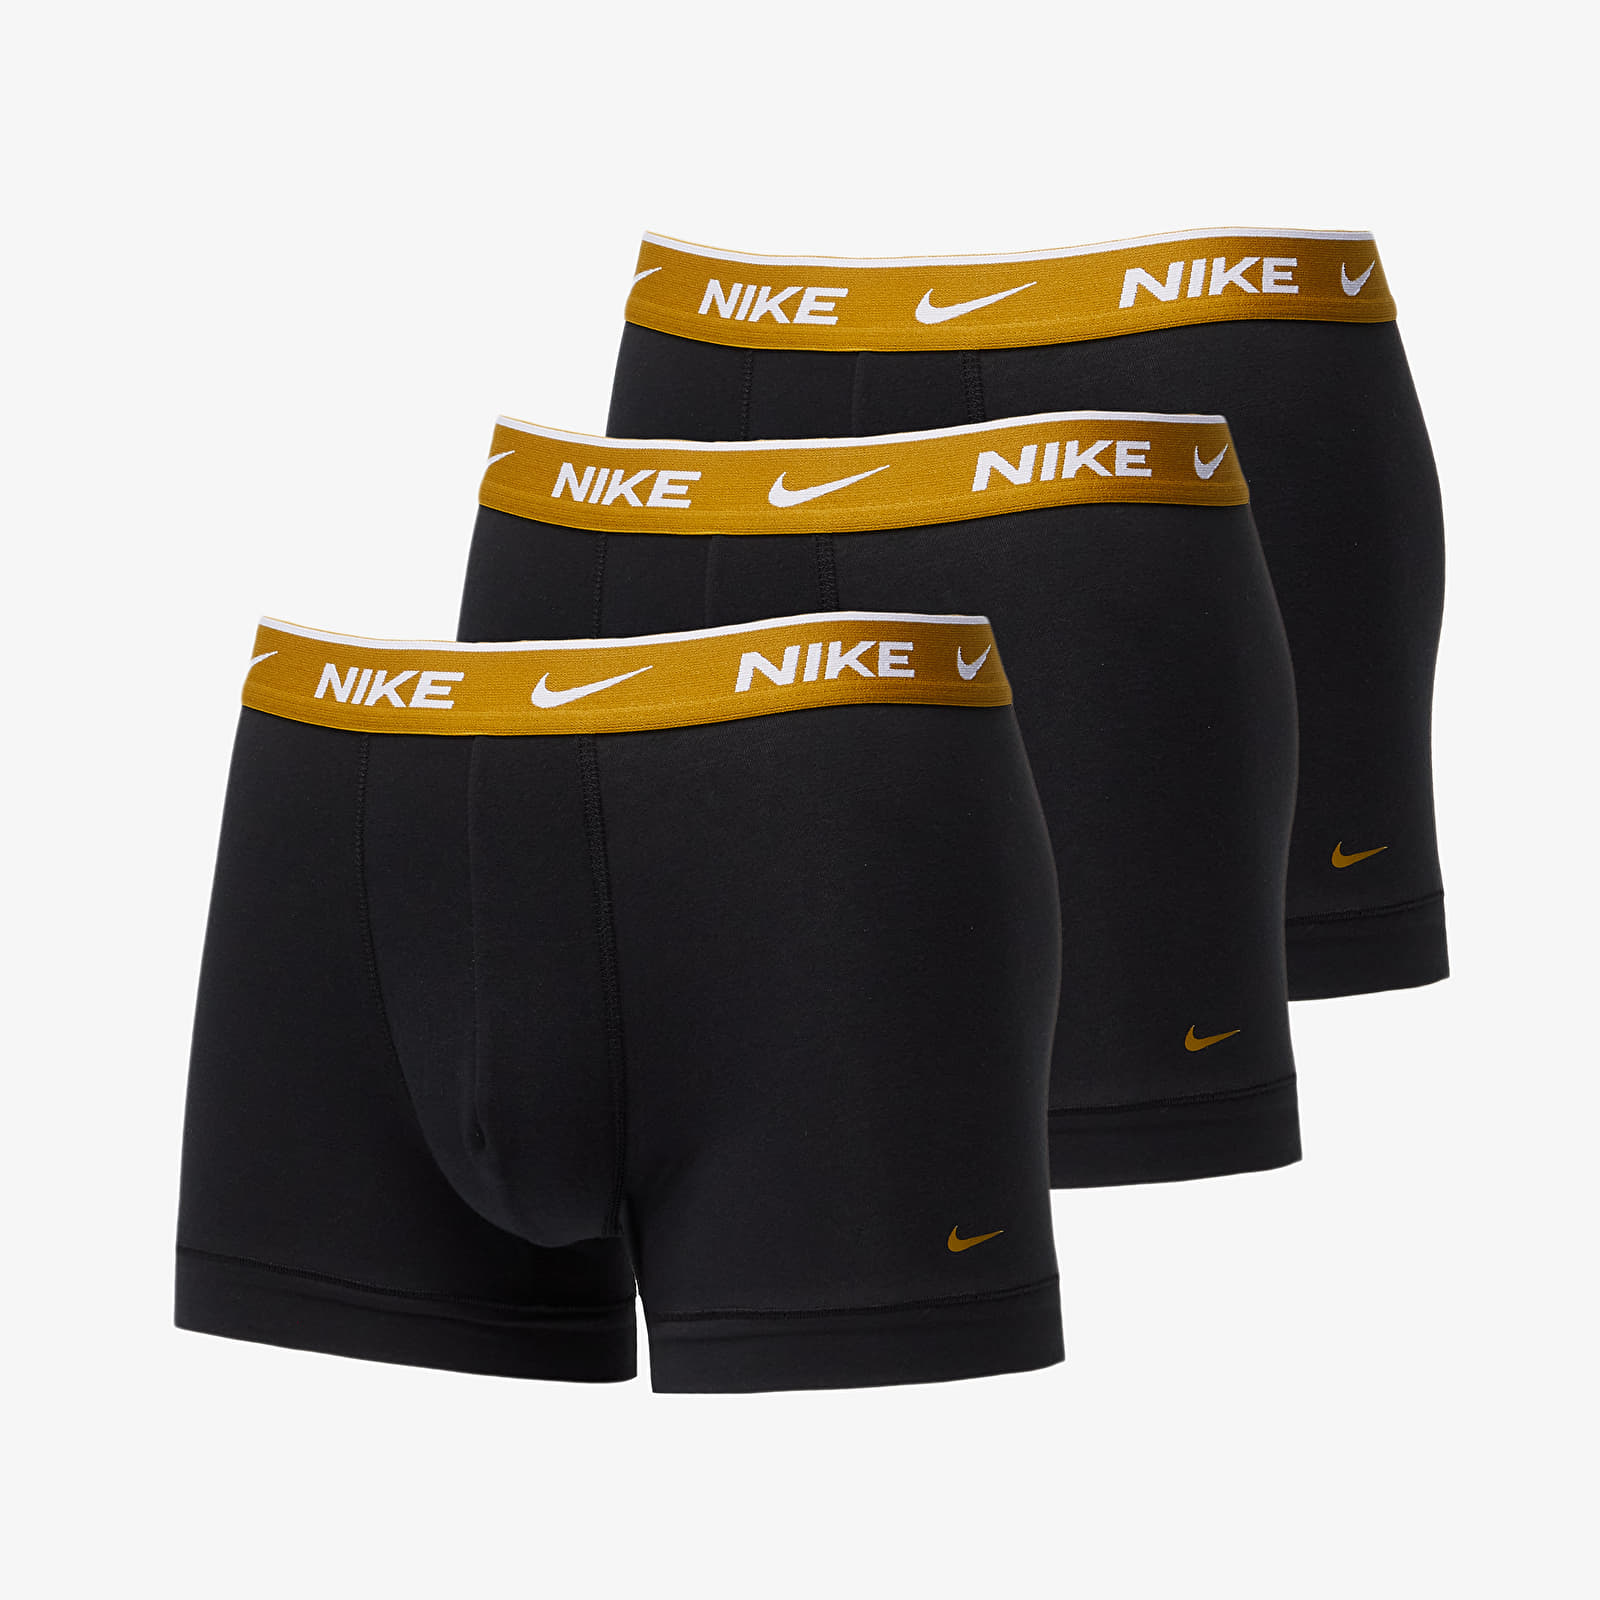 Boxer shorts Nike Dri-FIT Everyday Cotton Stretch Trunk 3-Pack